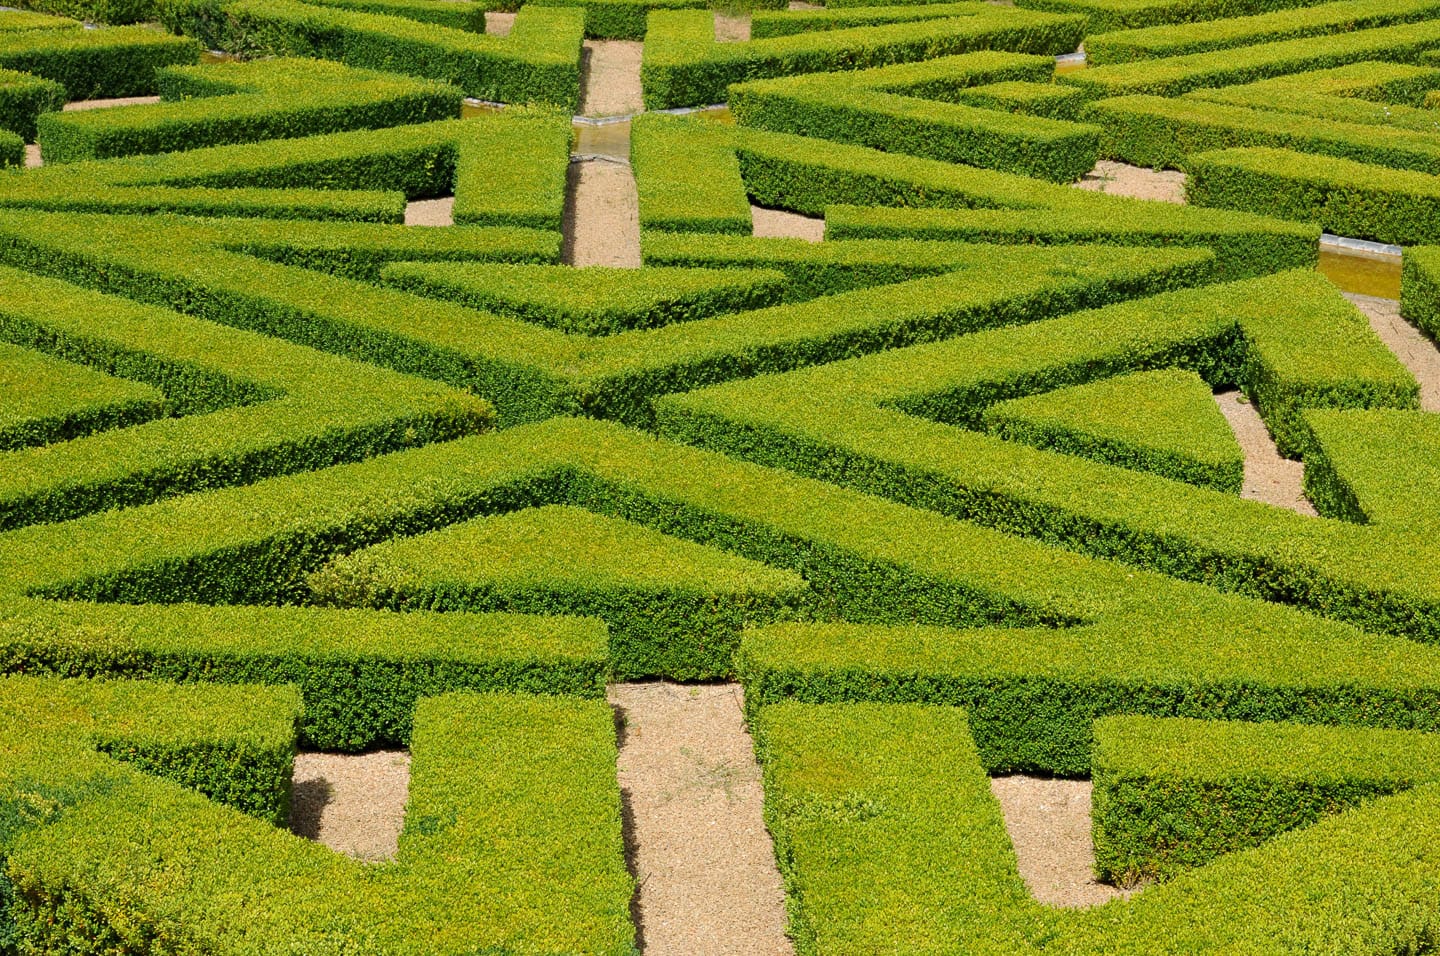 A geometrical garden with hedges clipped into a triangular design